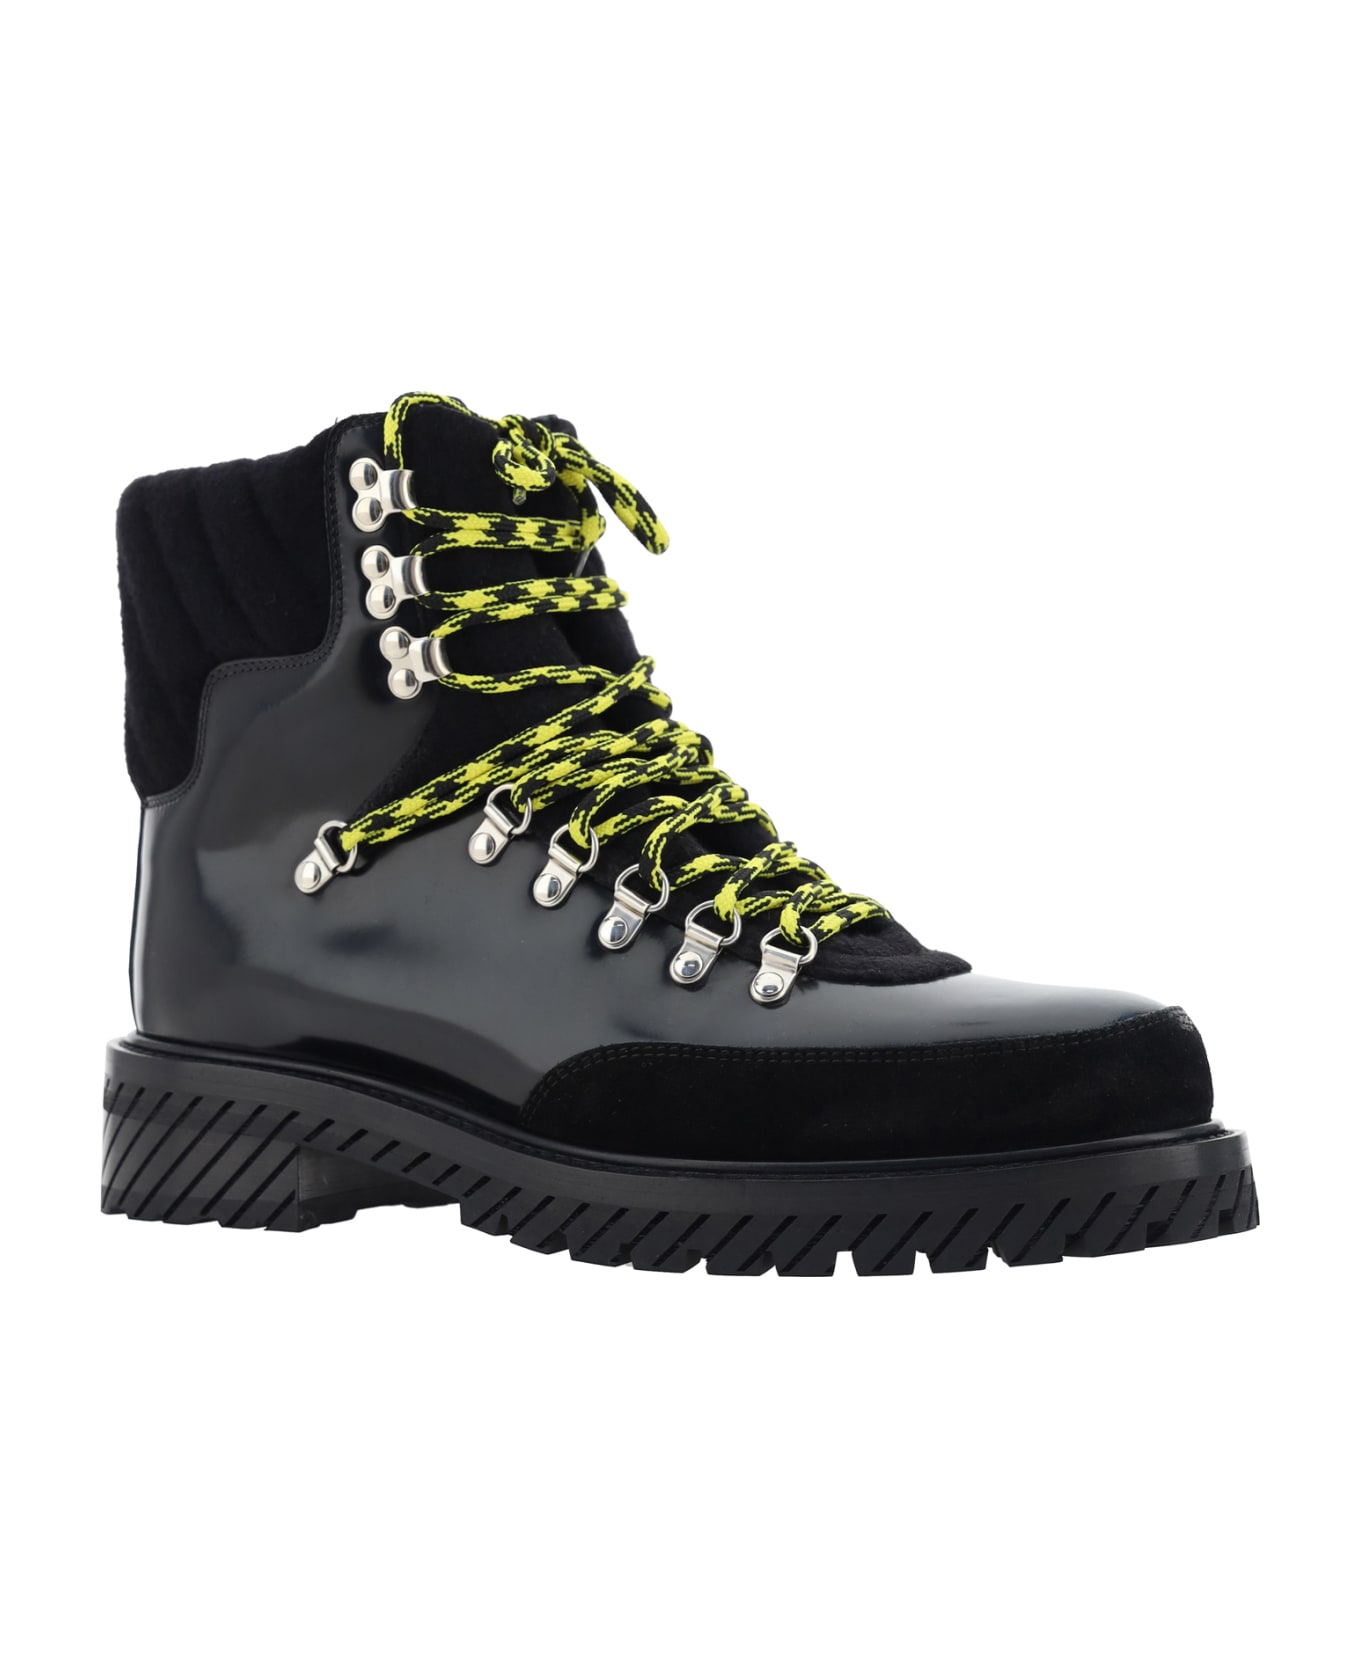 Off-White Gstaad Lace-up Boots - Black Blac ブーツ